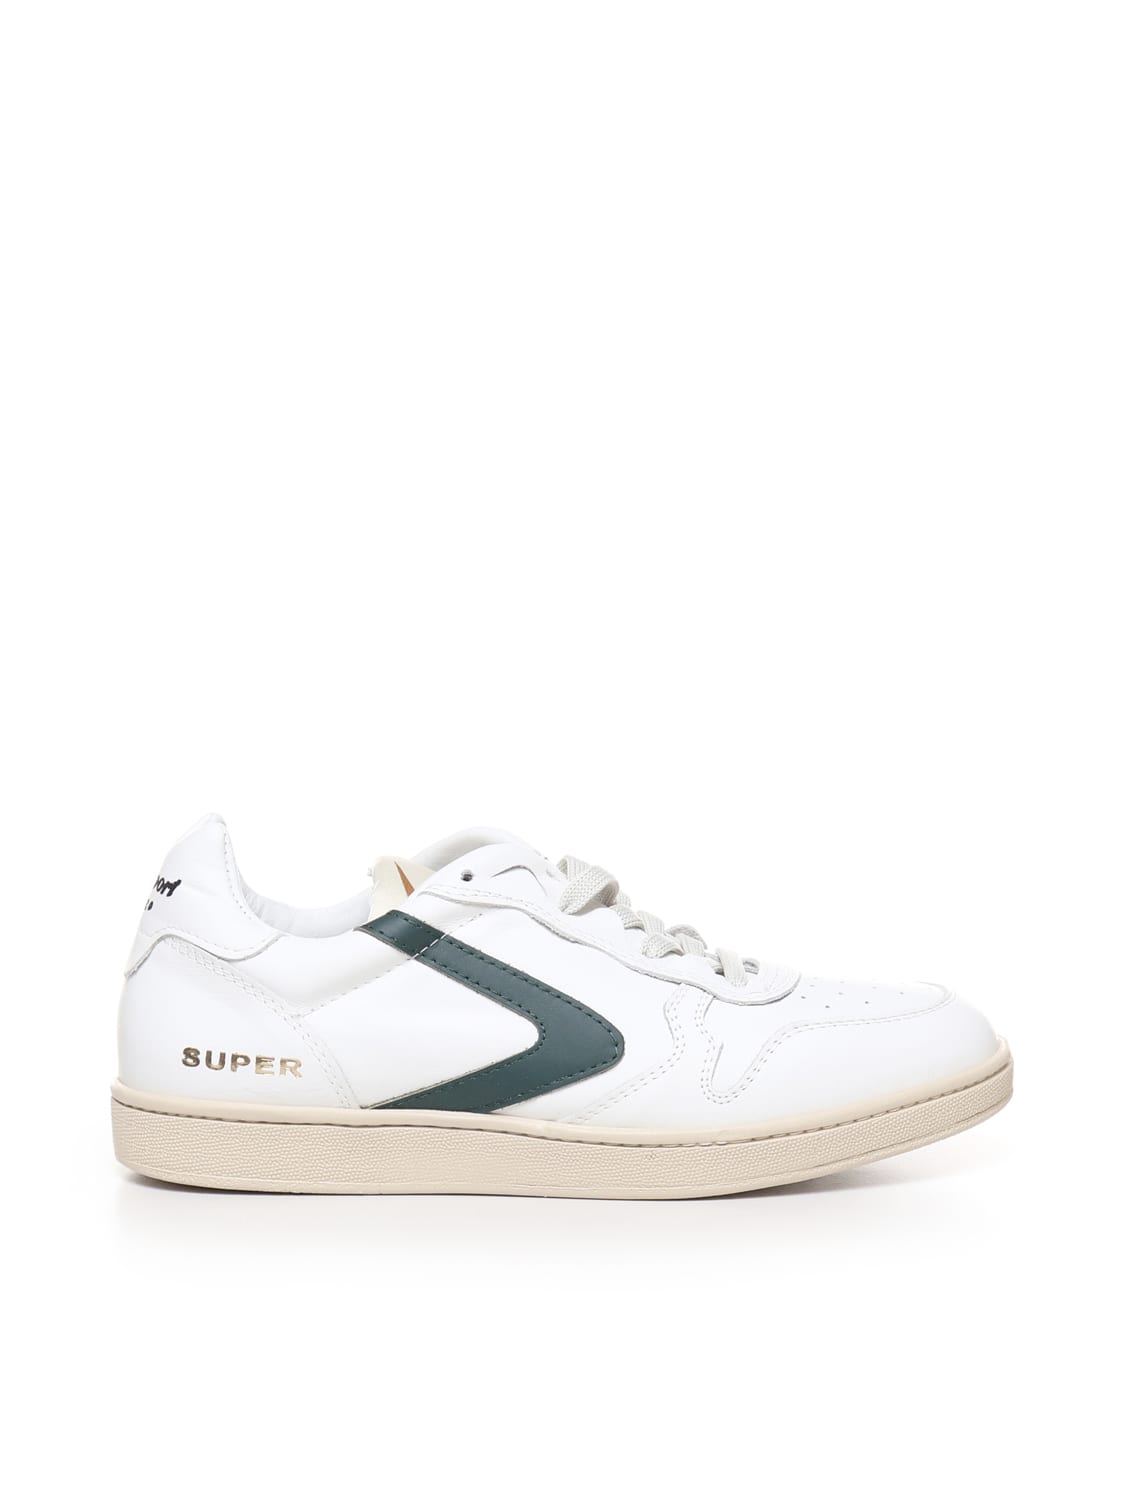 Valsport Sneakers Super 20 In White, Green